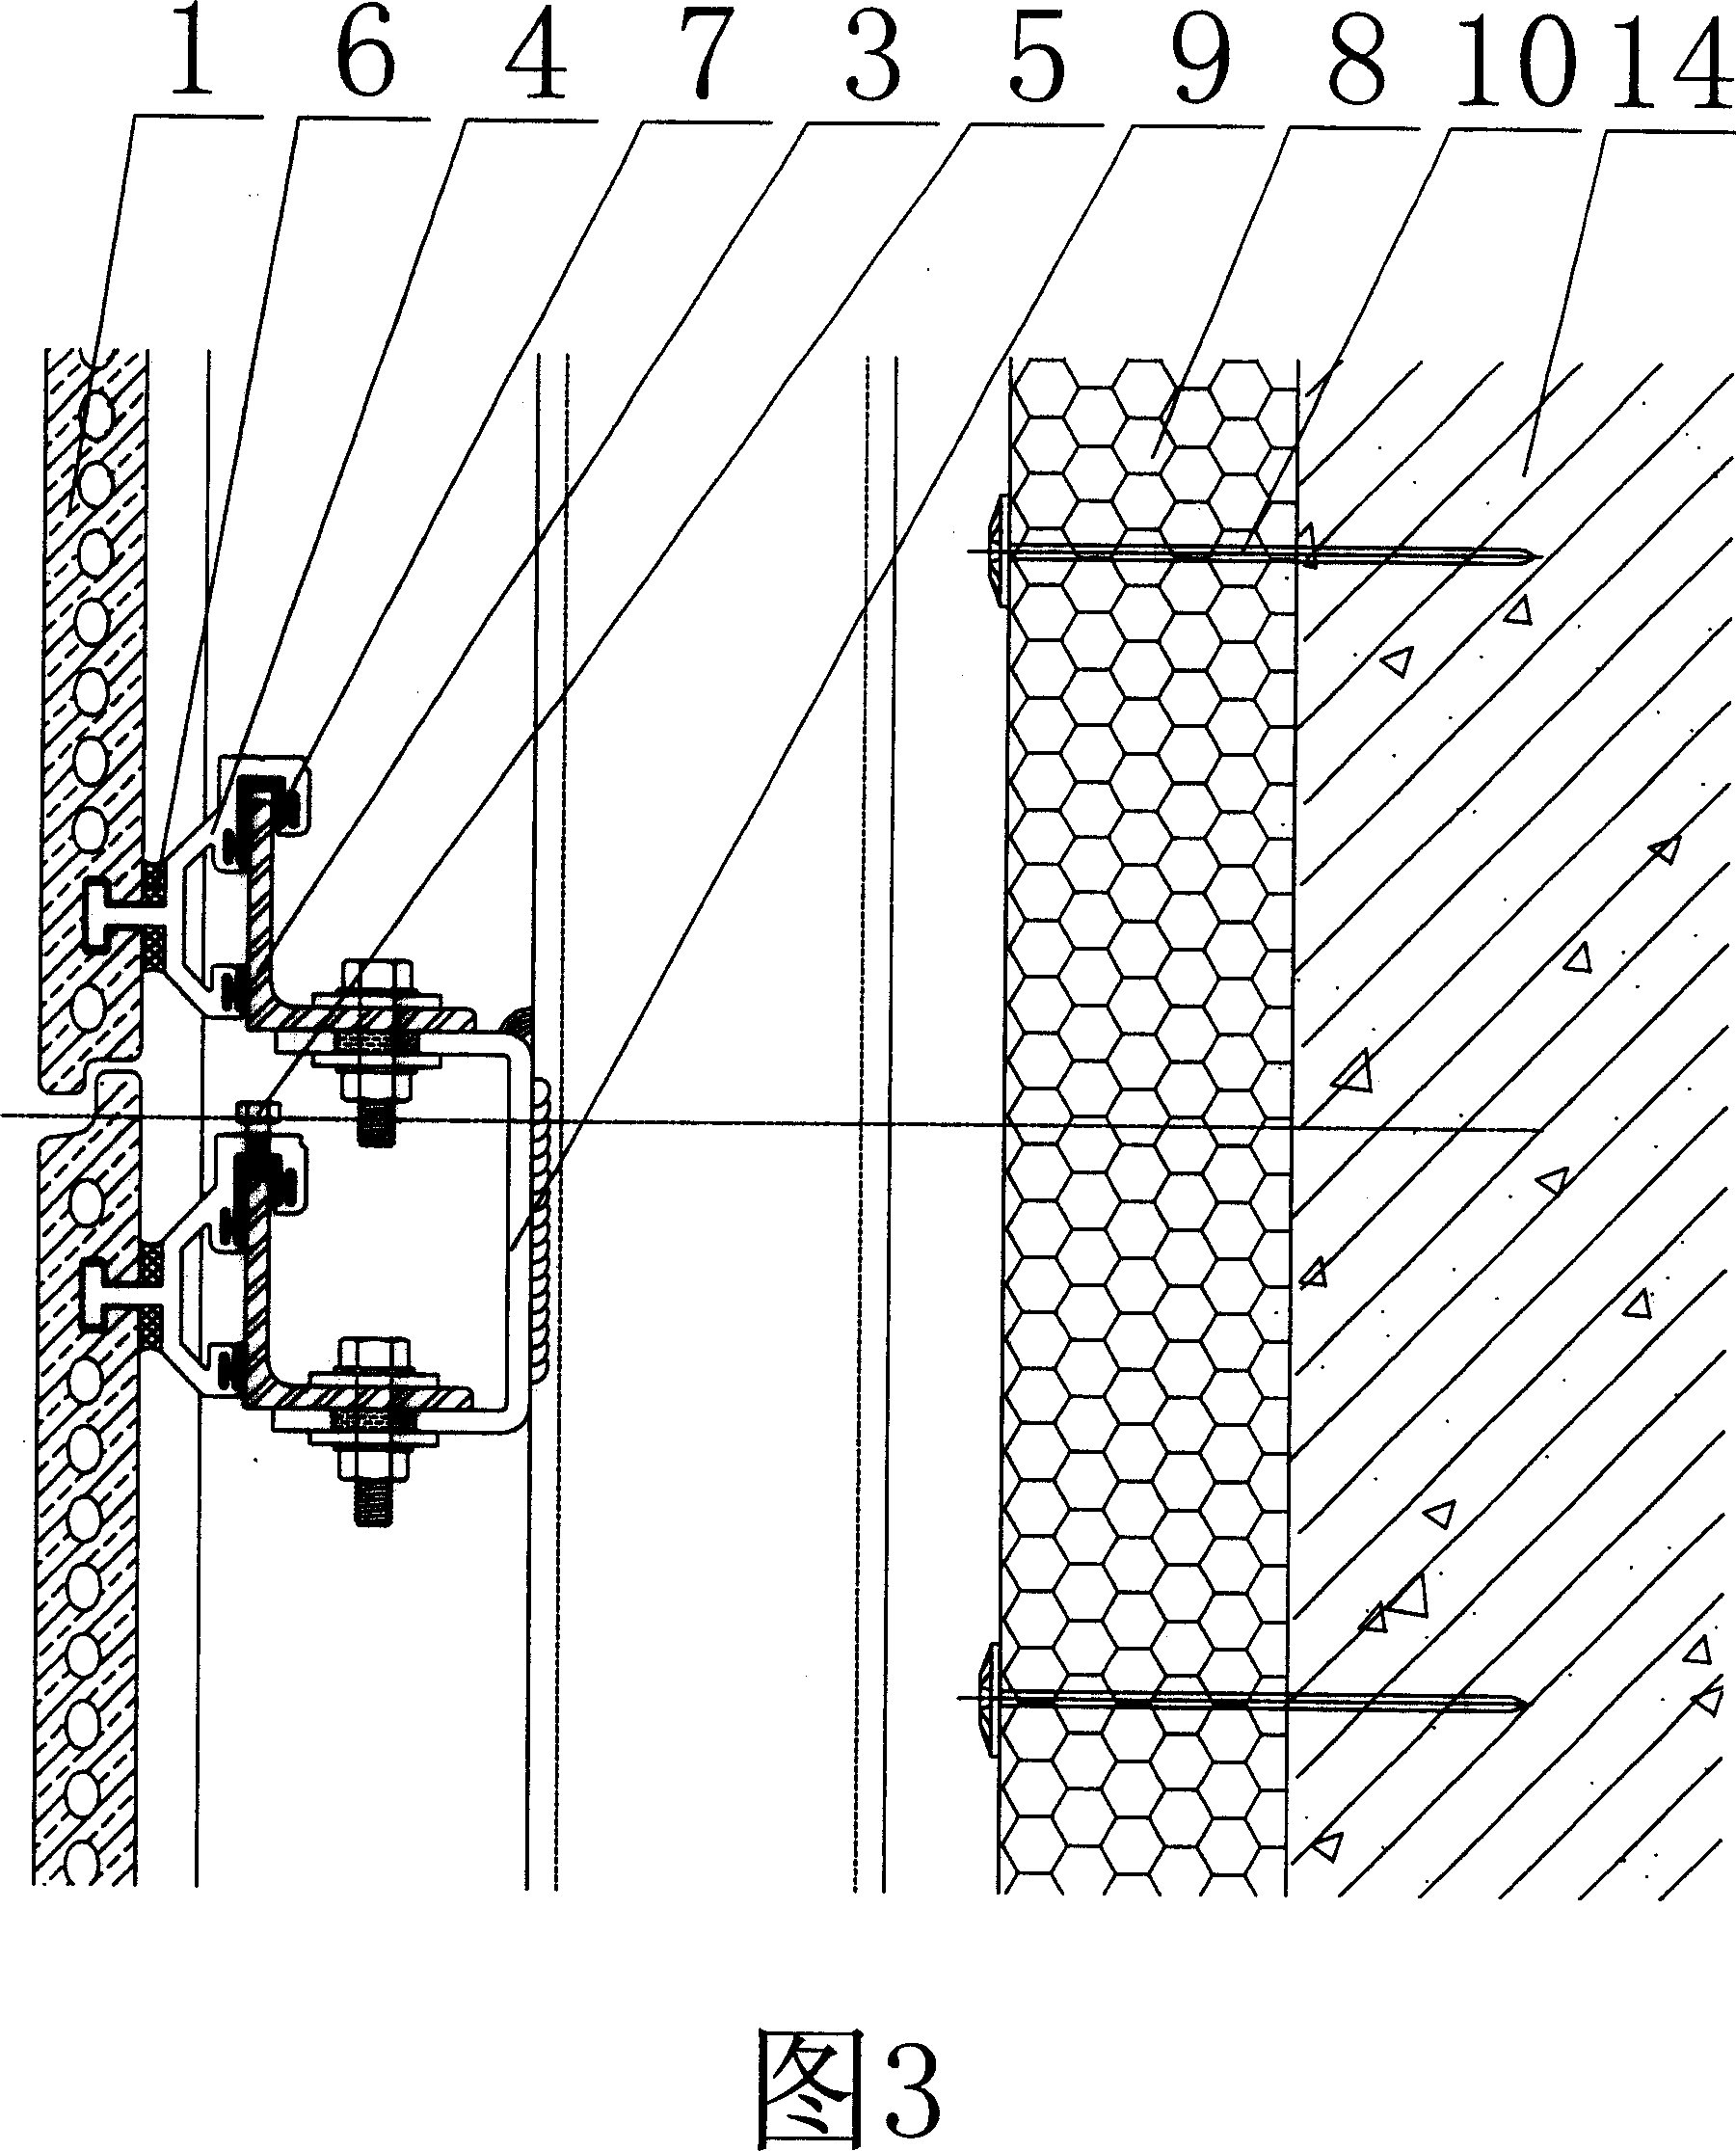 Mounting structure of figuline board curtain wall